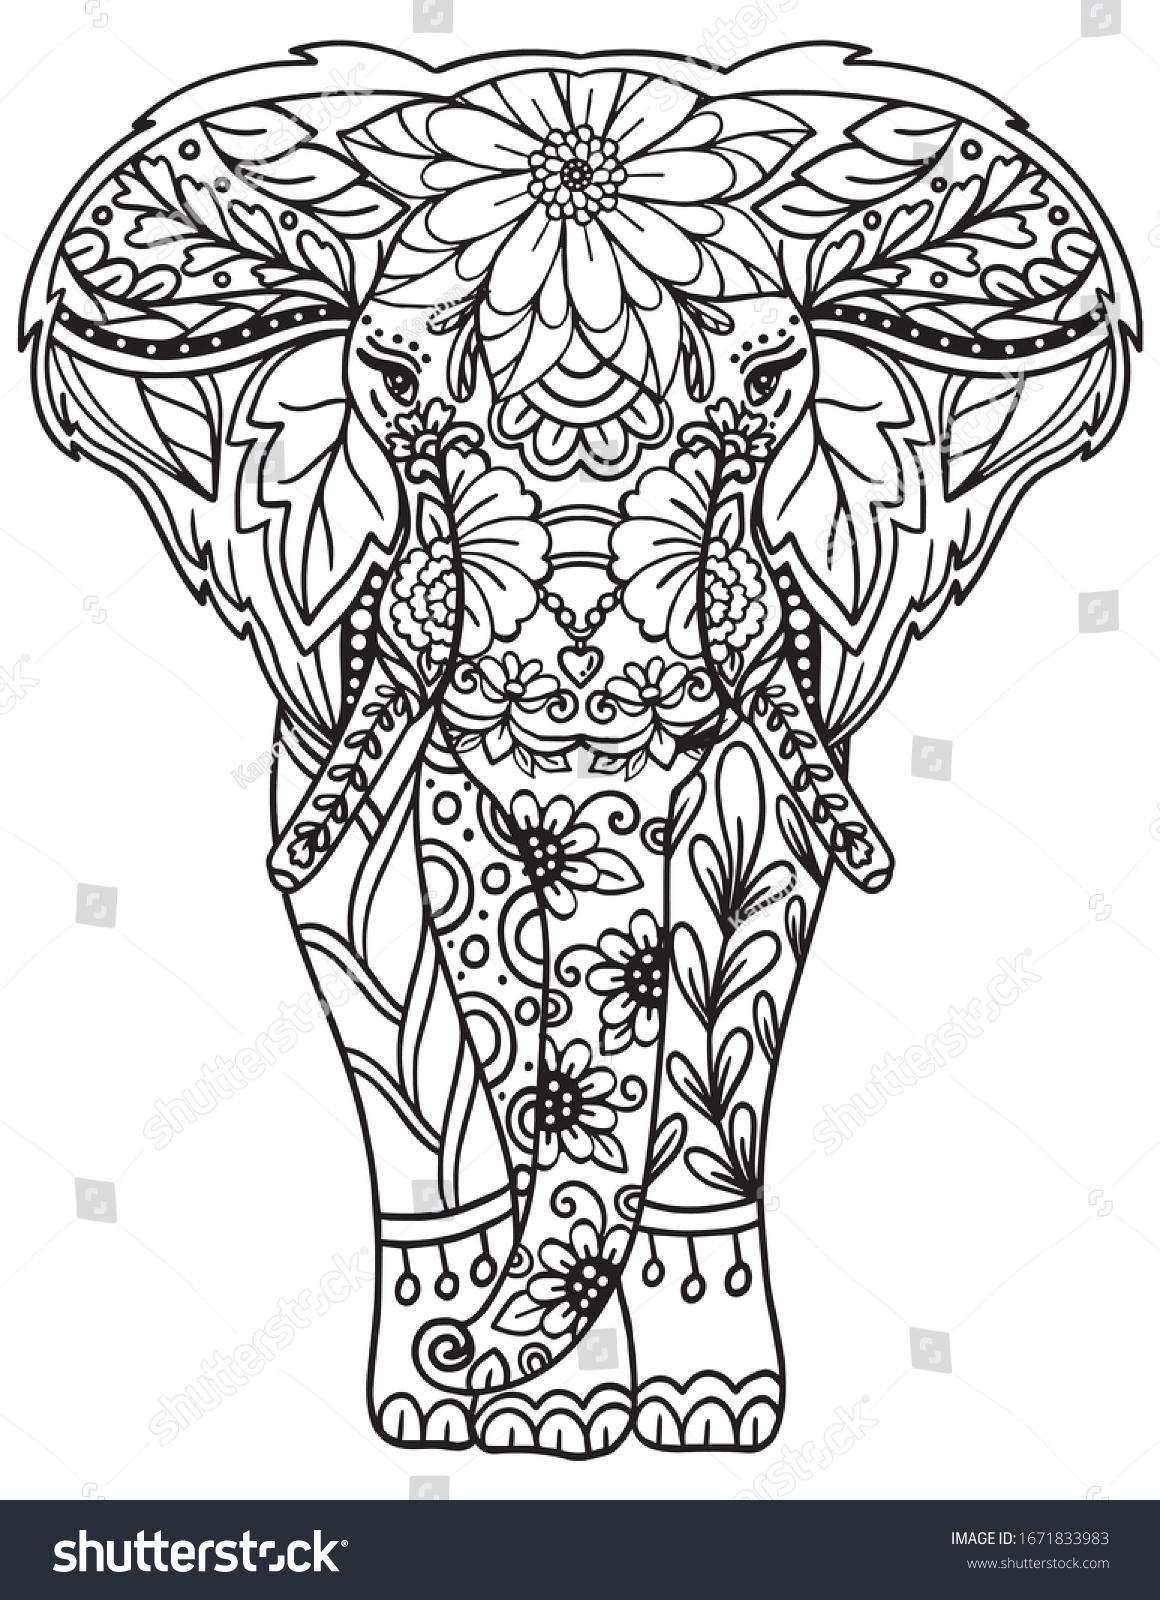 SVG of Hand drawn elephant doodle with flower decorative elements. Coloring page for adult and kids. Vector Illustration. svg